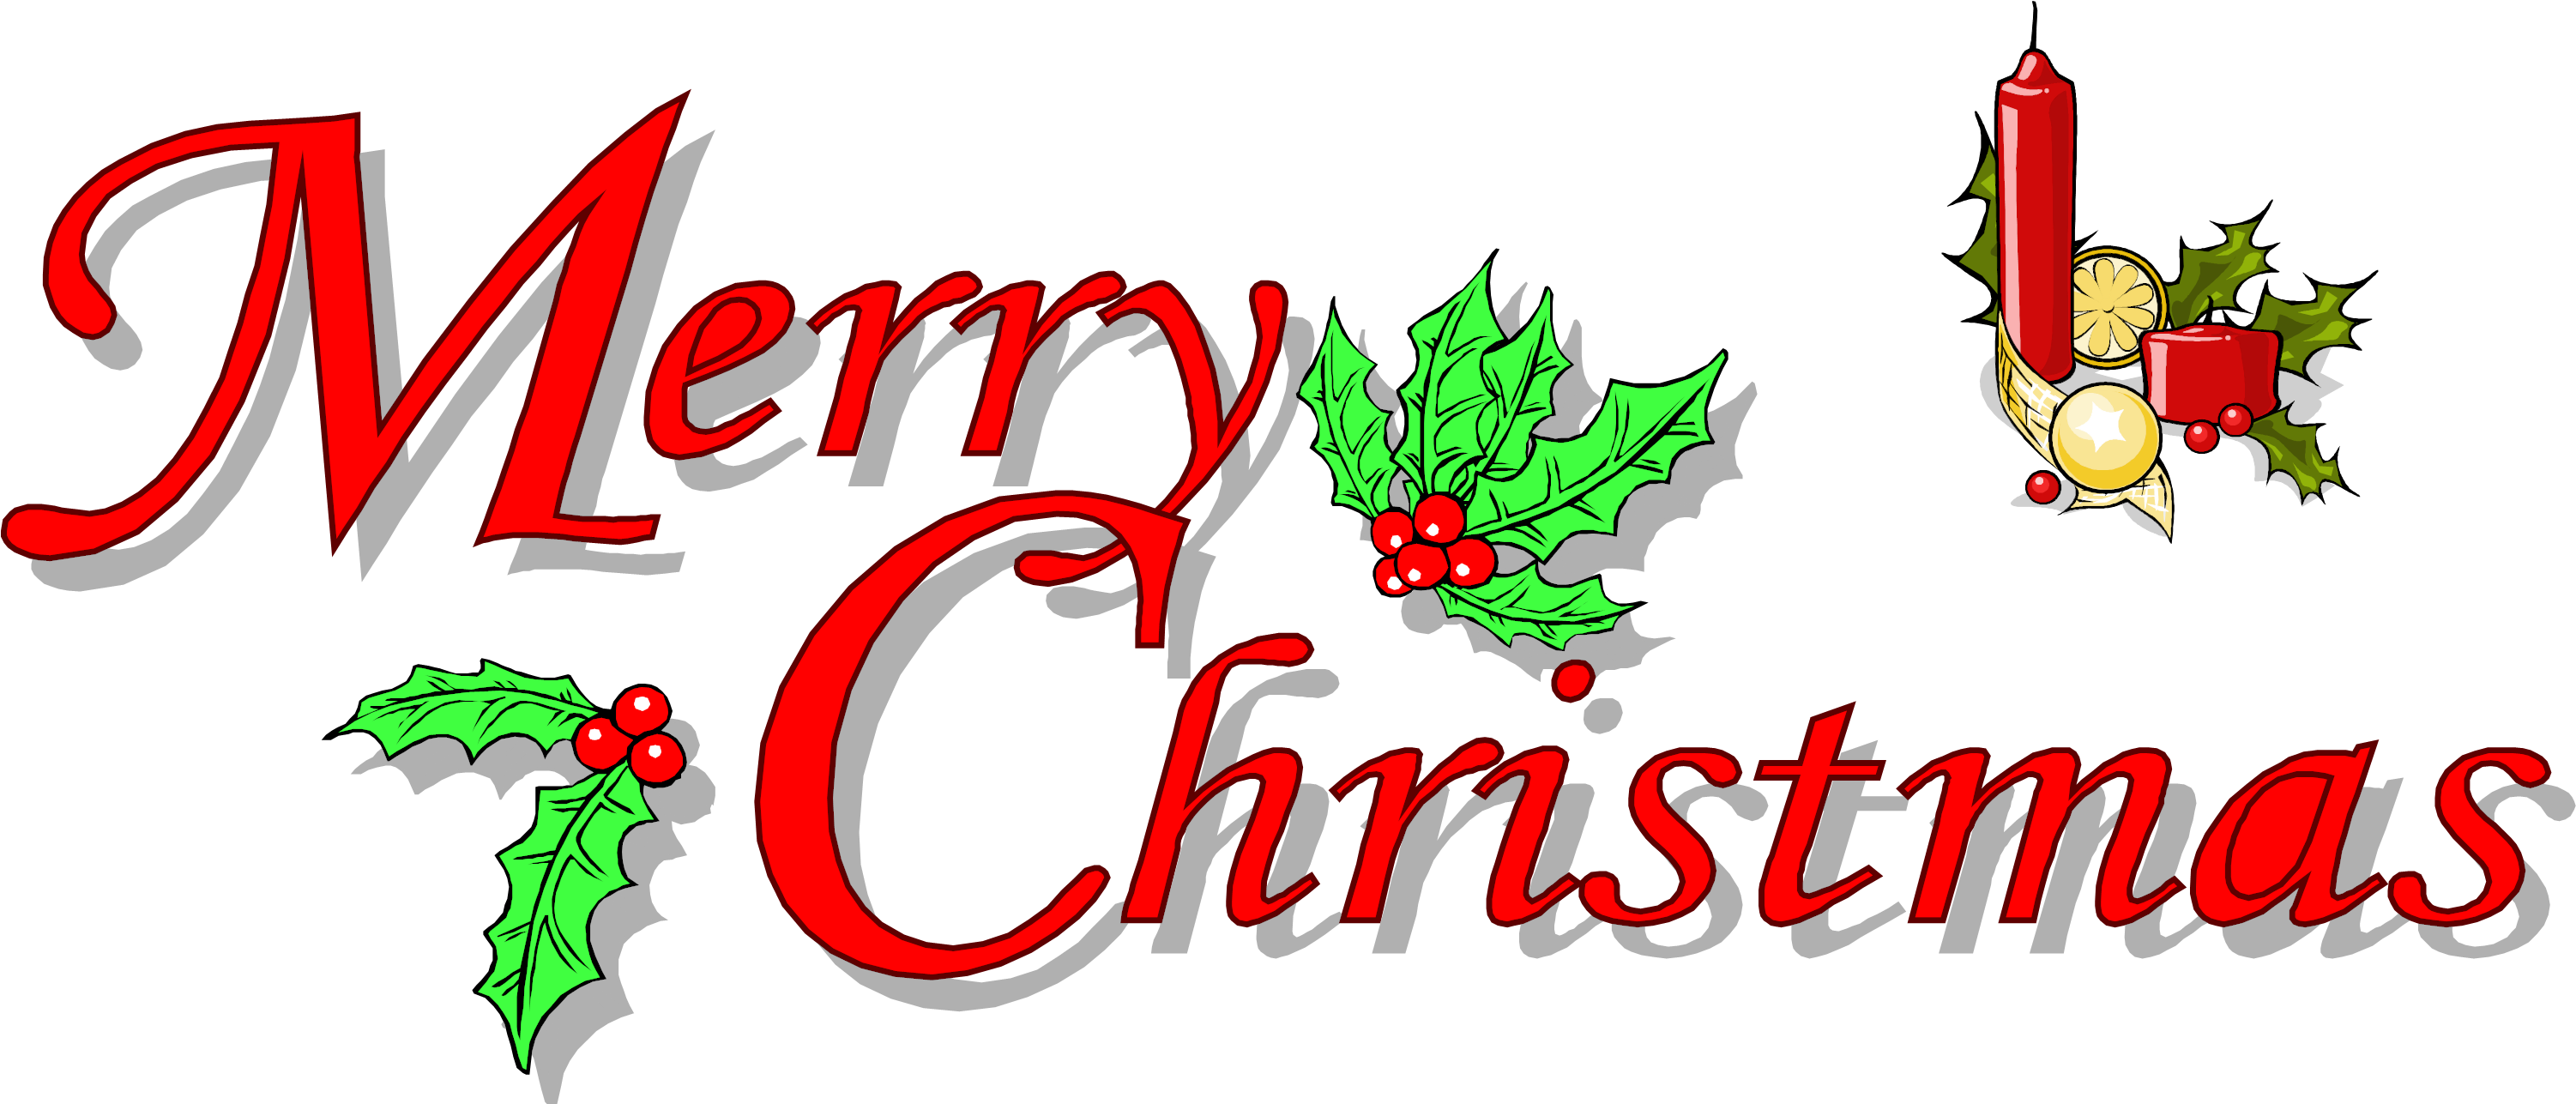 Merry Christmas Text Design Celebration PNG